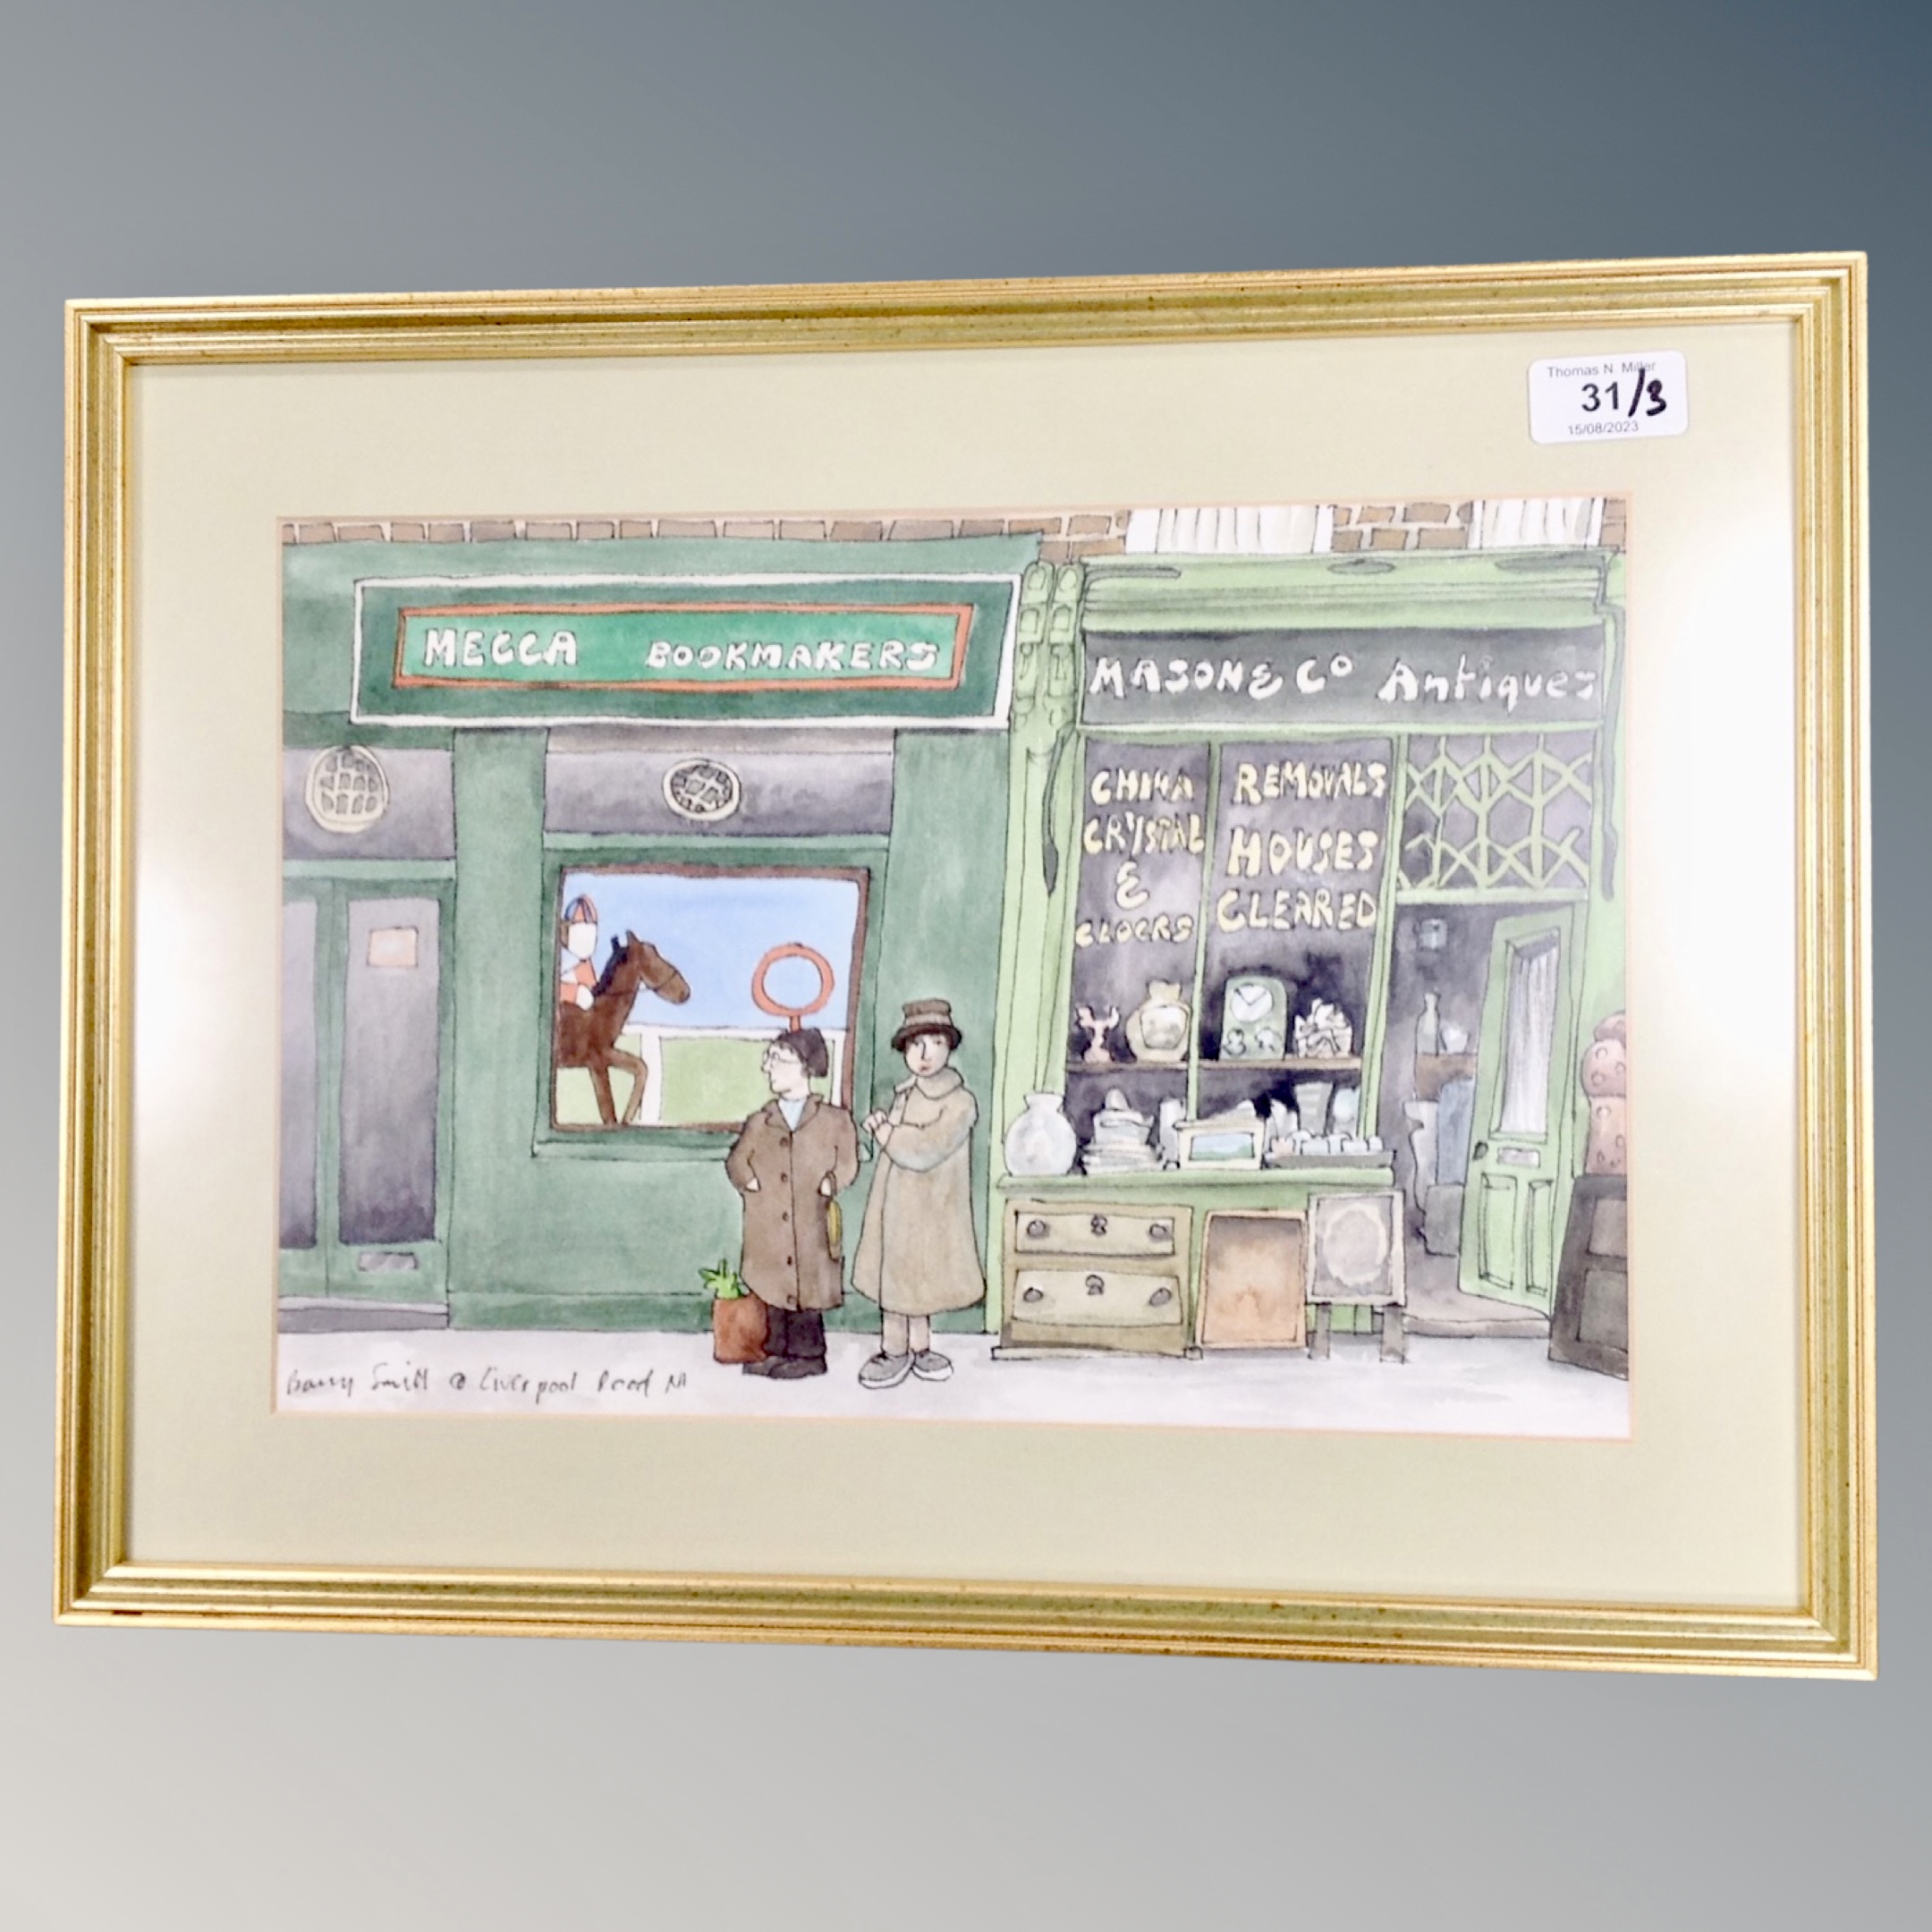 Barry Smith : MECCA Bookmakers, Liverpool road, watercolour, signed, 24 cm x 35 cm,